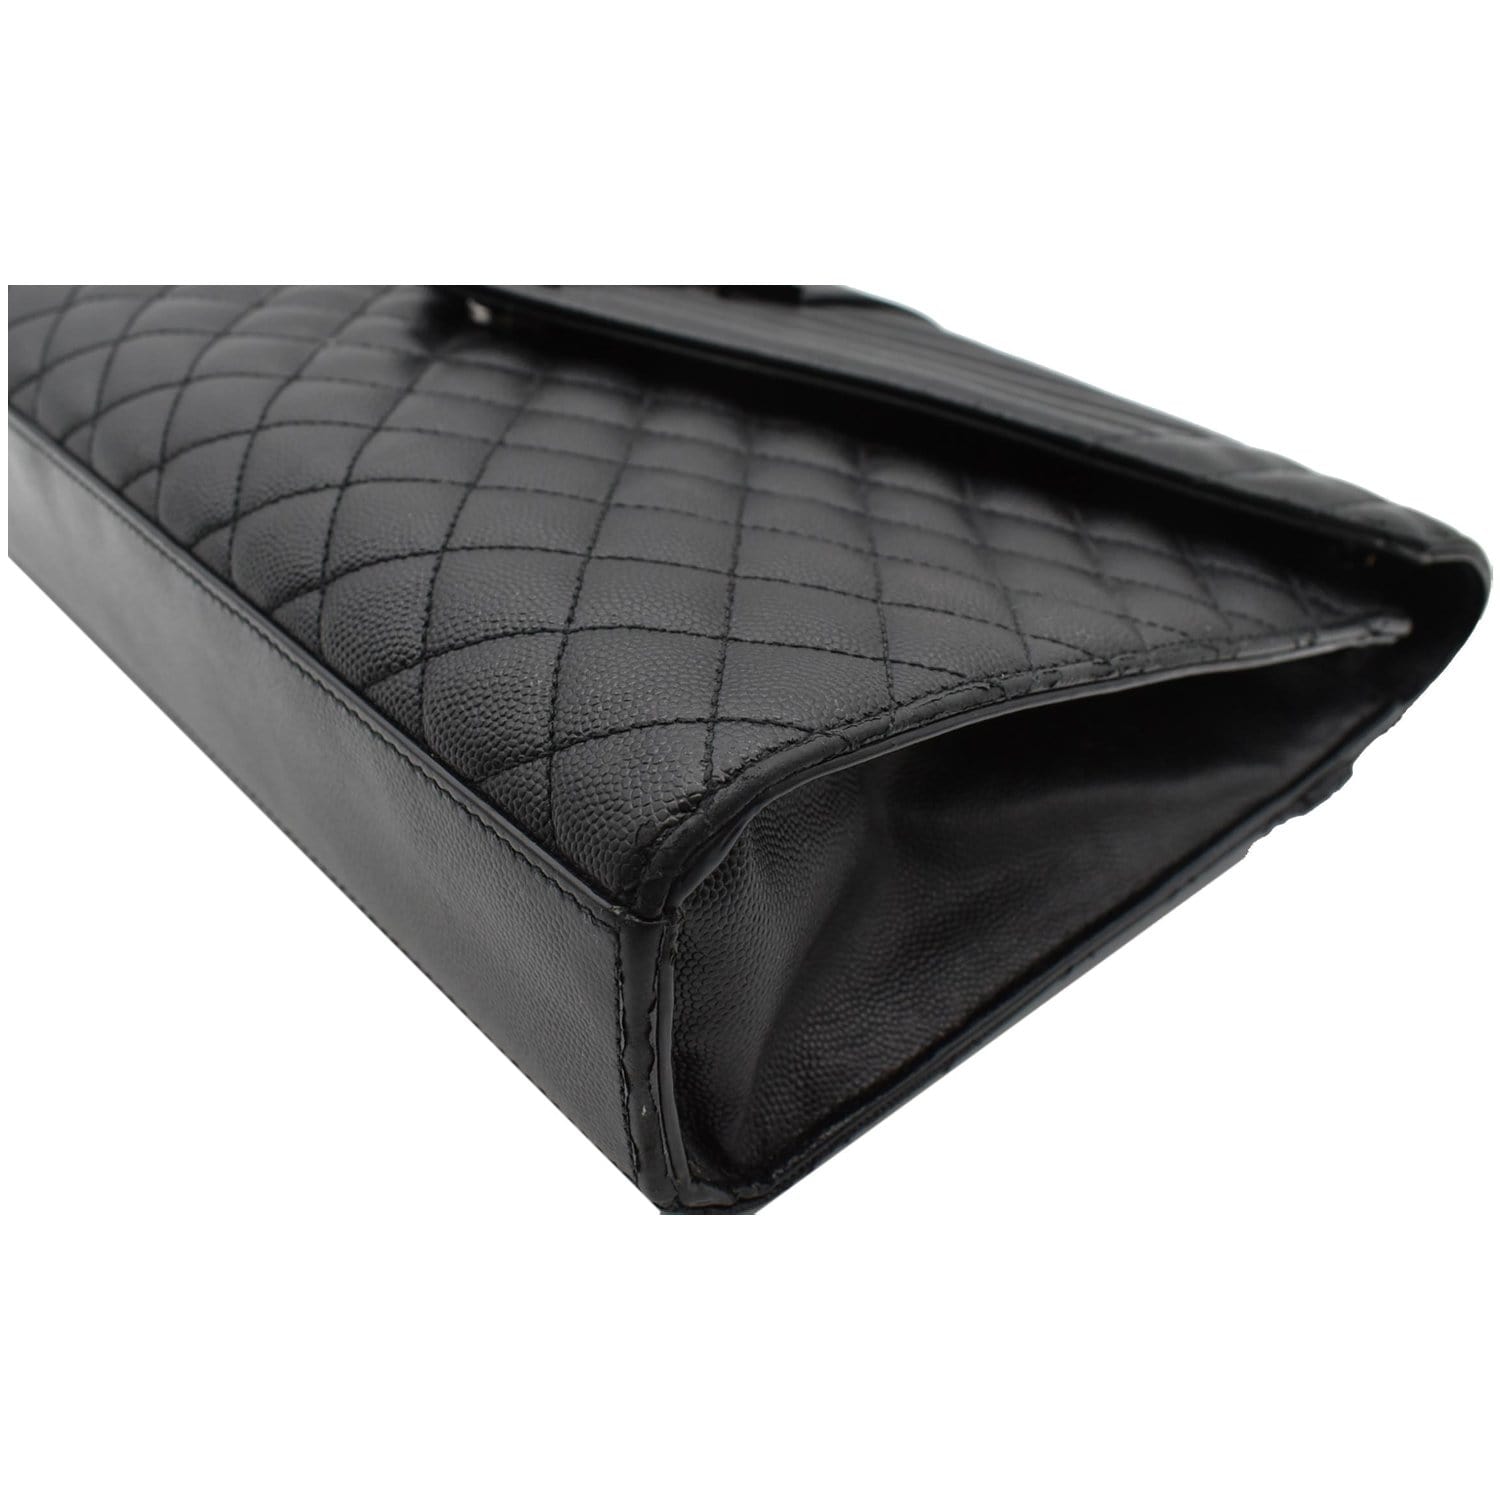 large envelope in quilted grain de poudre leather